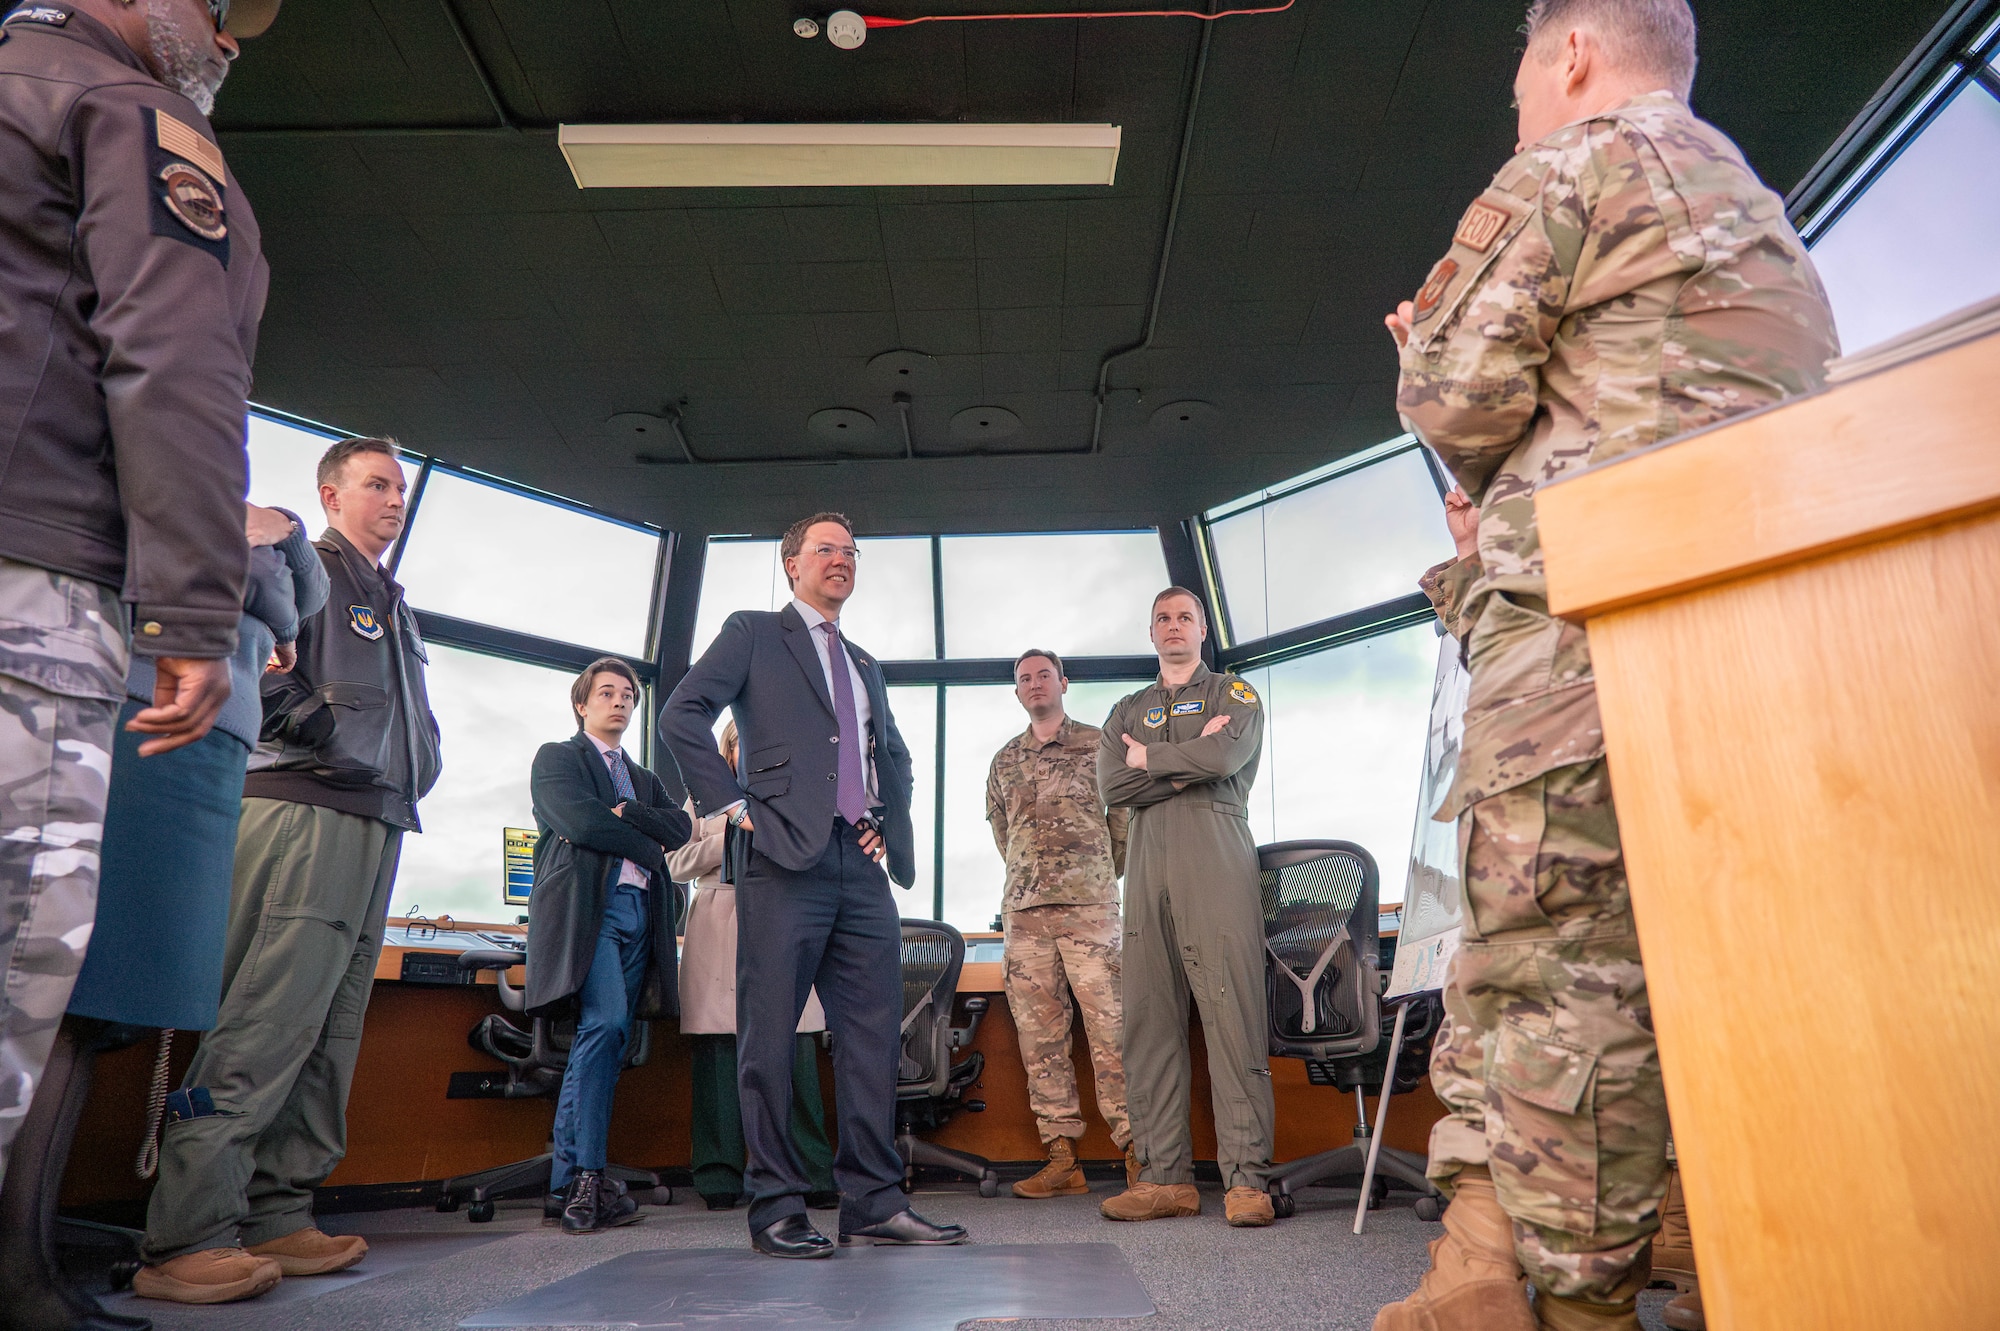 Robert Courts speaks with personnel in an air traffic control tower